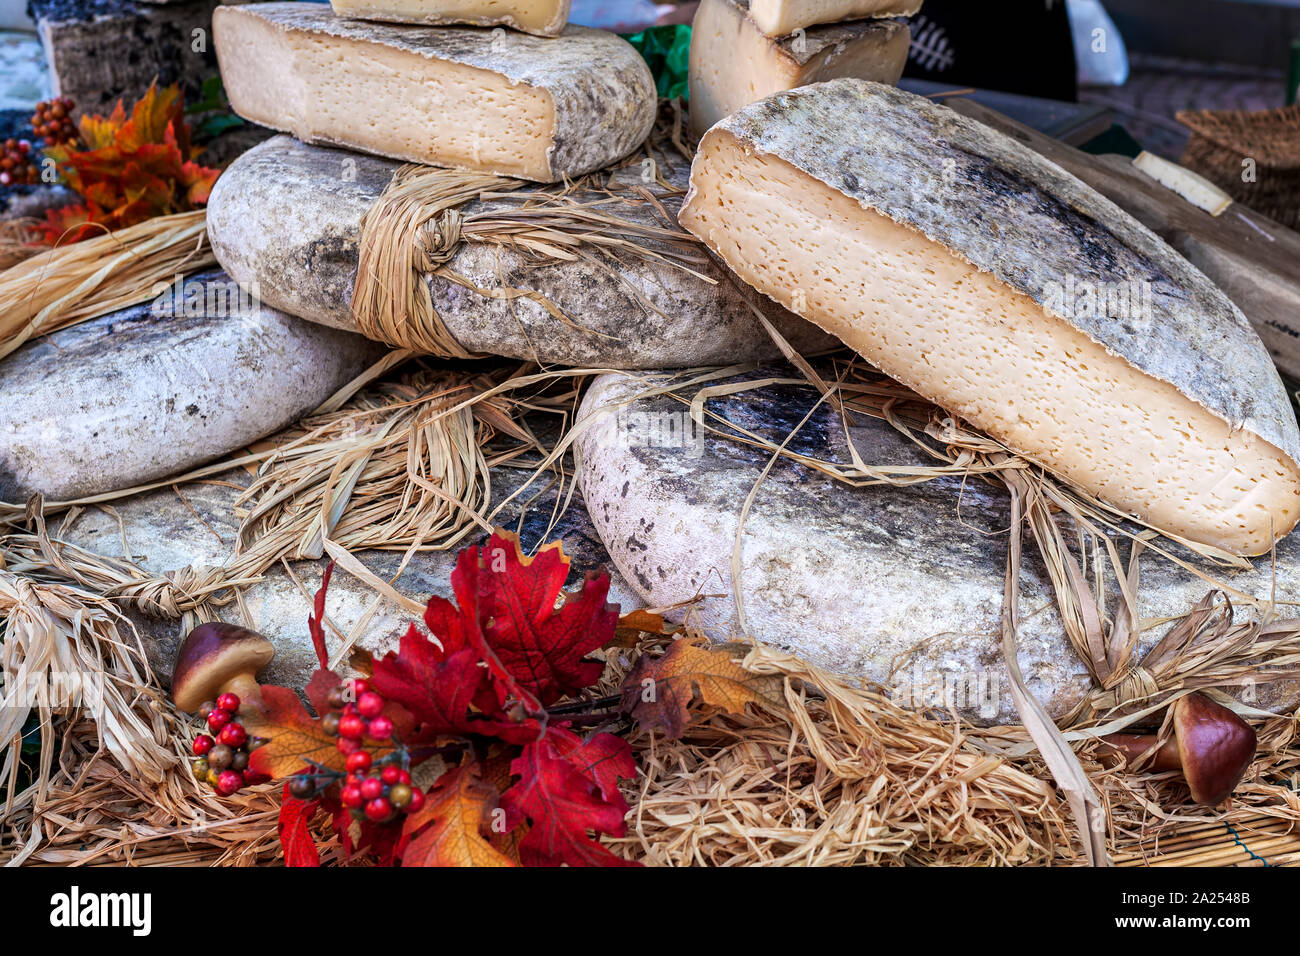 Close-up view of semi-hard cheese wrapped in straw on the stall at the market in Italy. Stock Photo